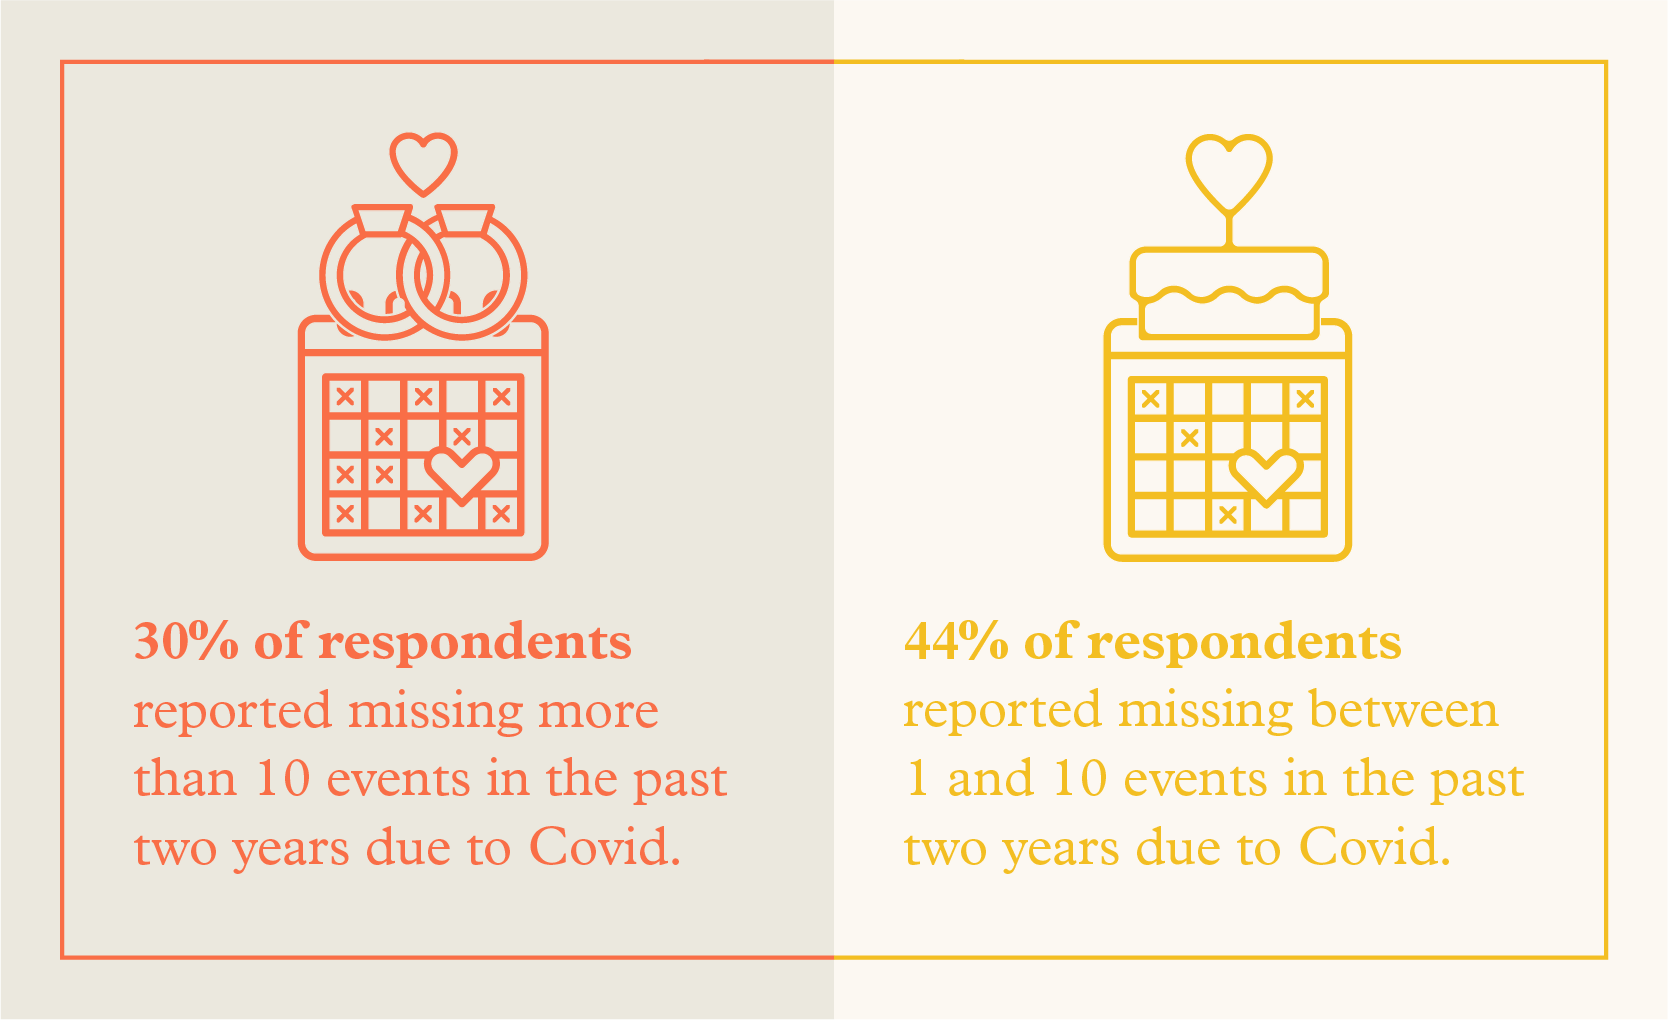 Infographic with two sections. The left explains that 30% of respondents reported missing more than 10 events in the past two years; the right explains that 44% of respondents reported missing between 1 and 10 events in the past two years.